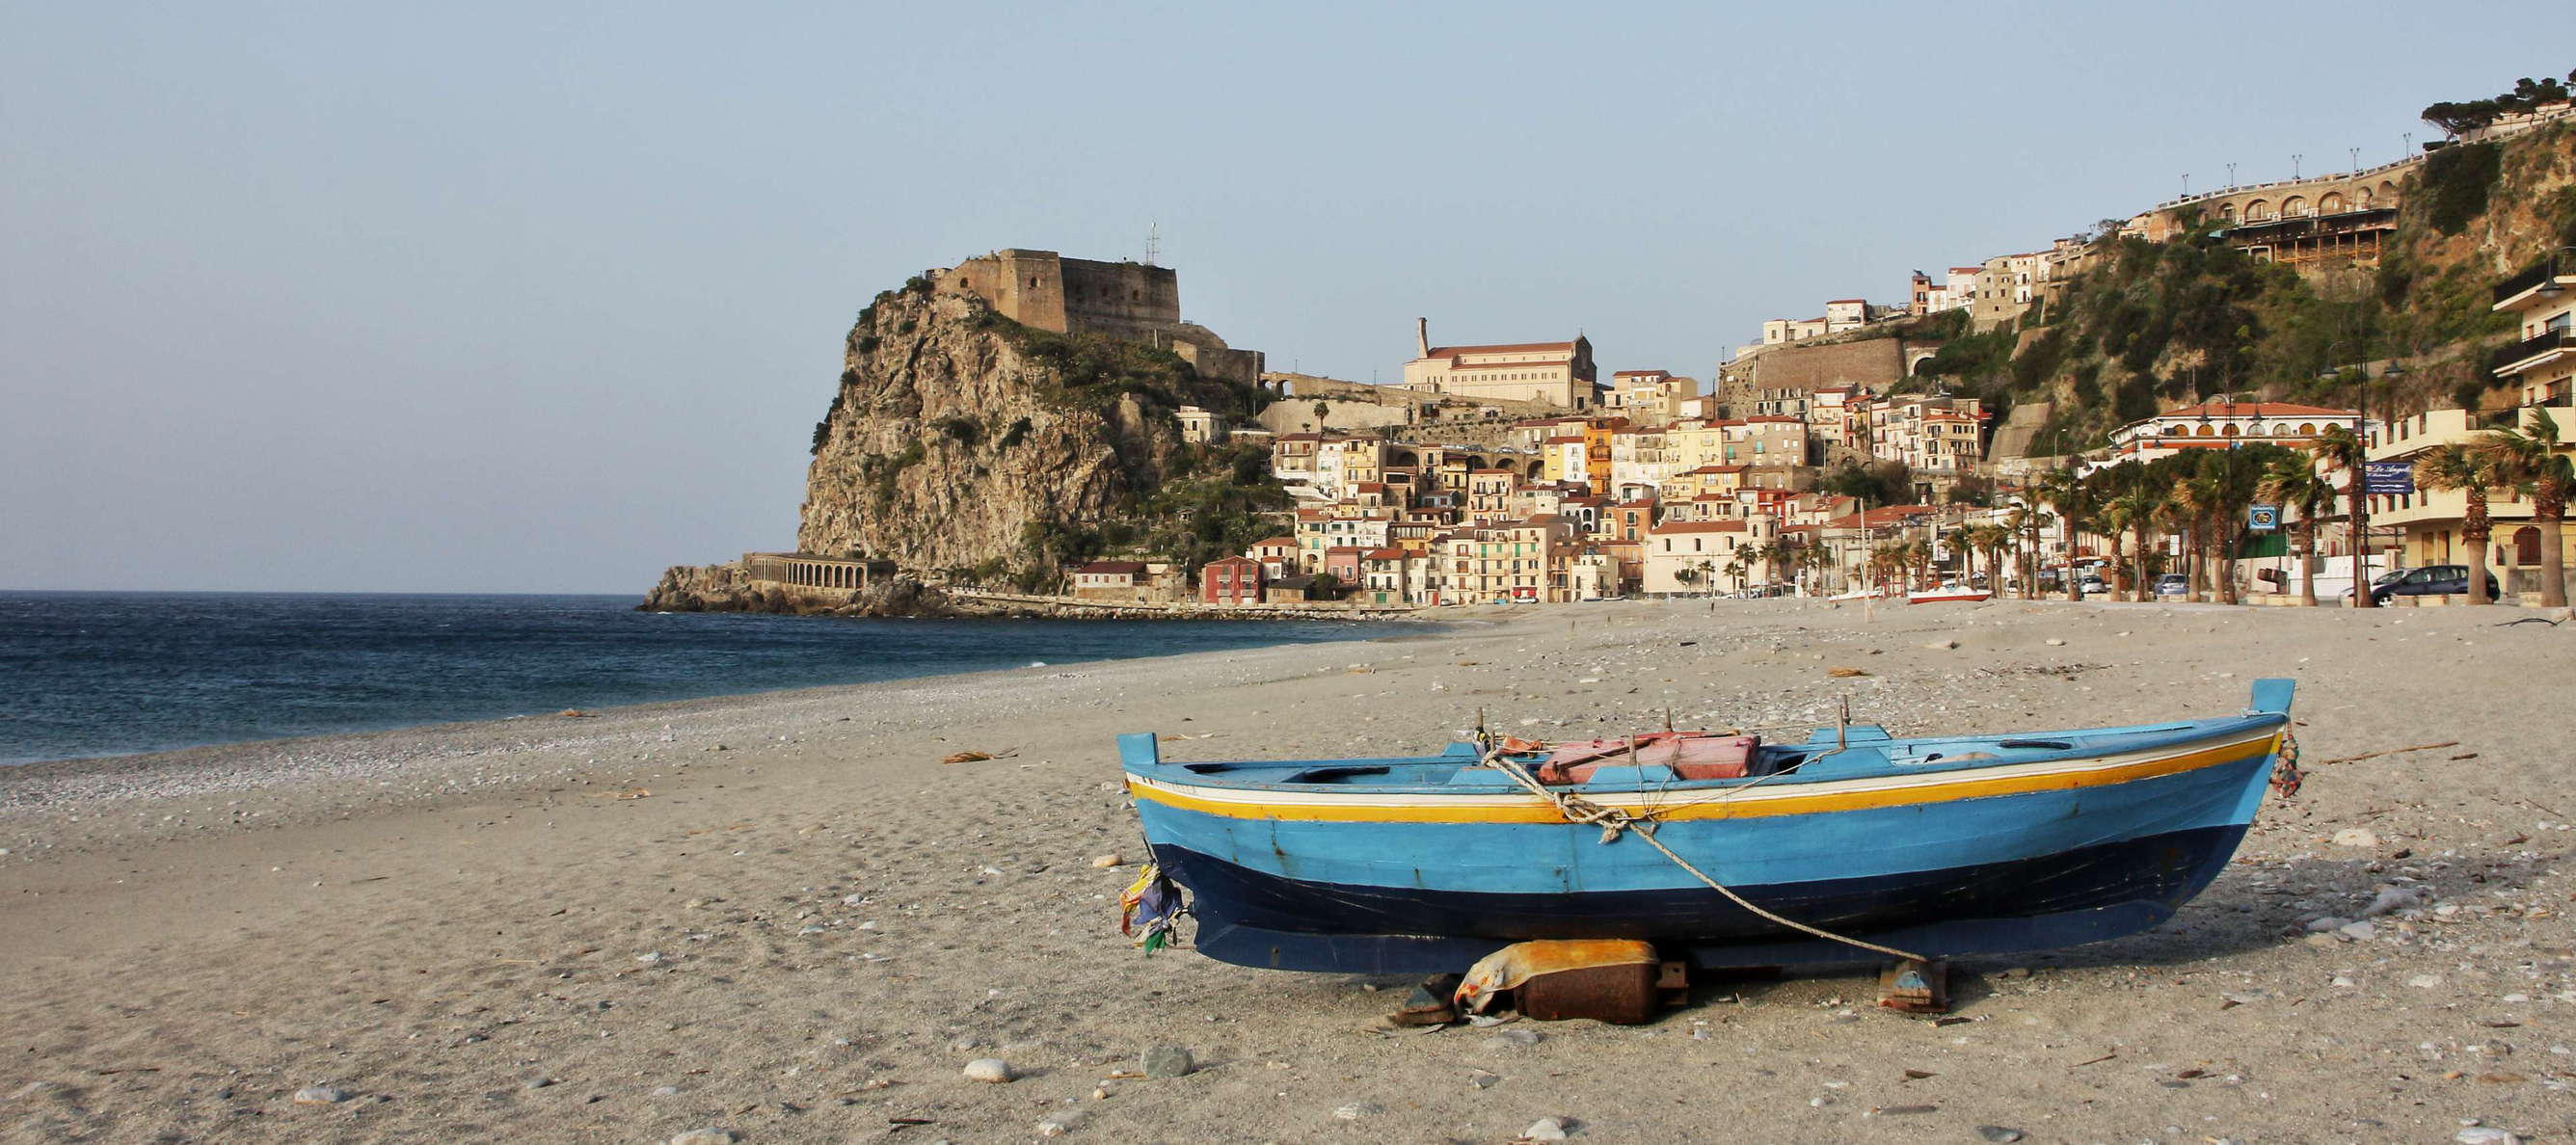 Scilla with fishing boat